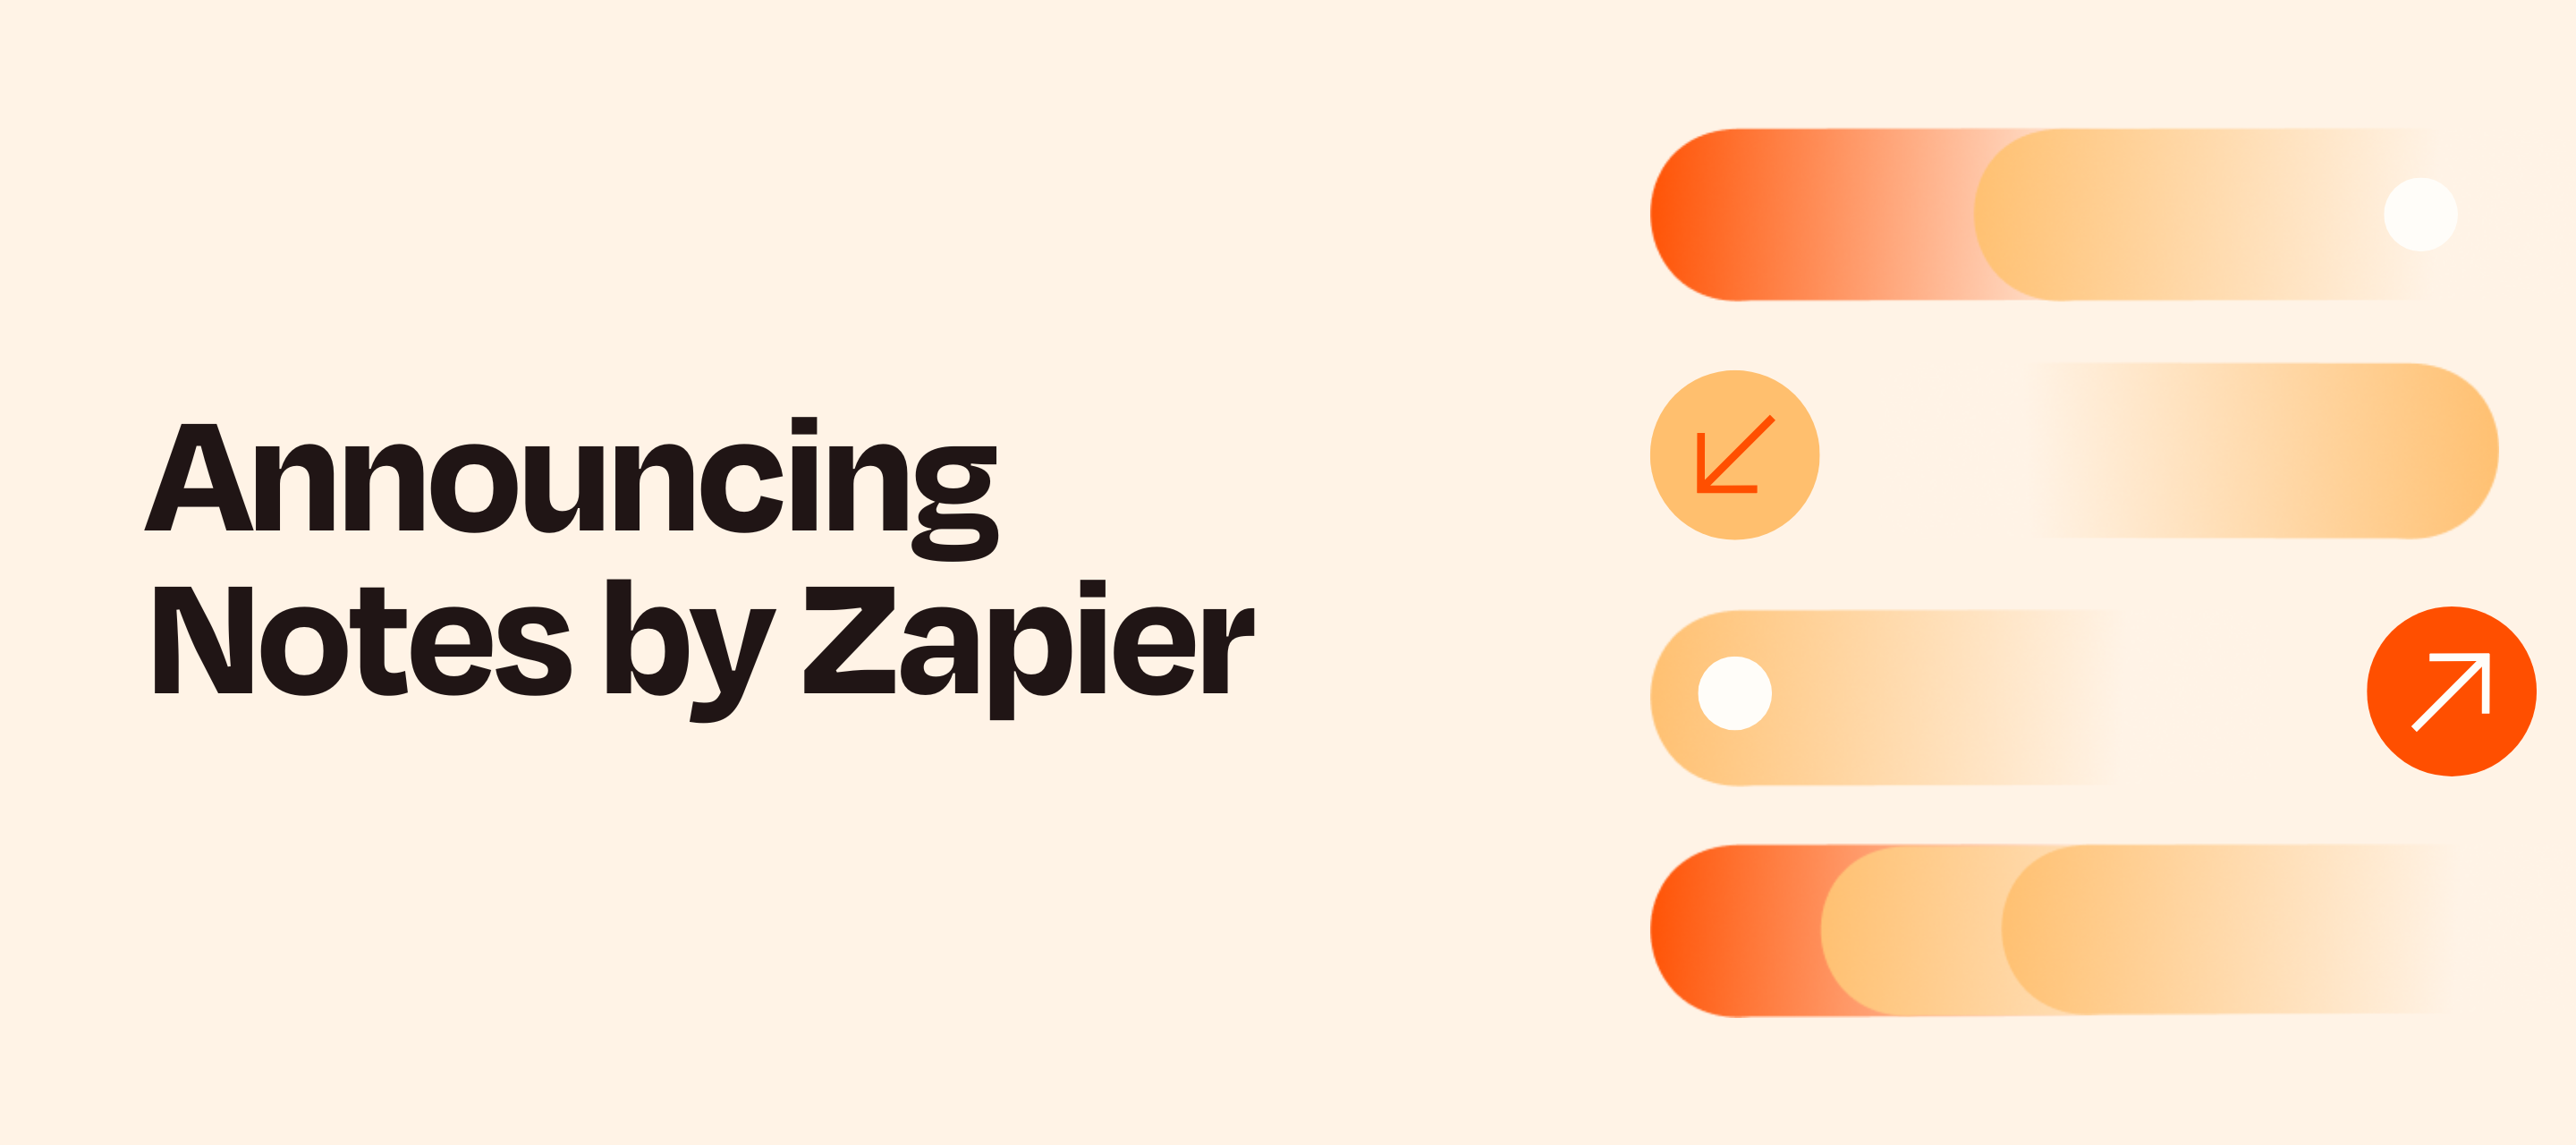 Notes by Zapier is here!